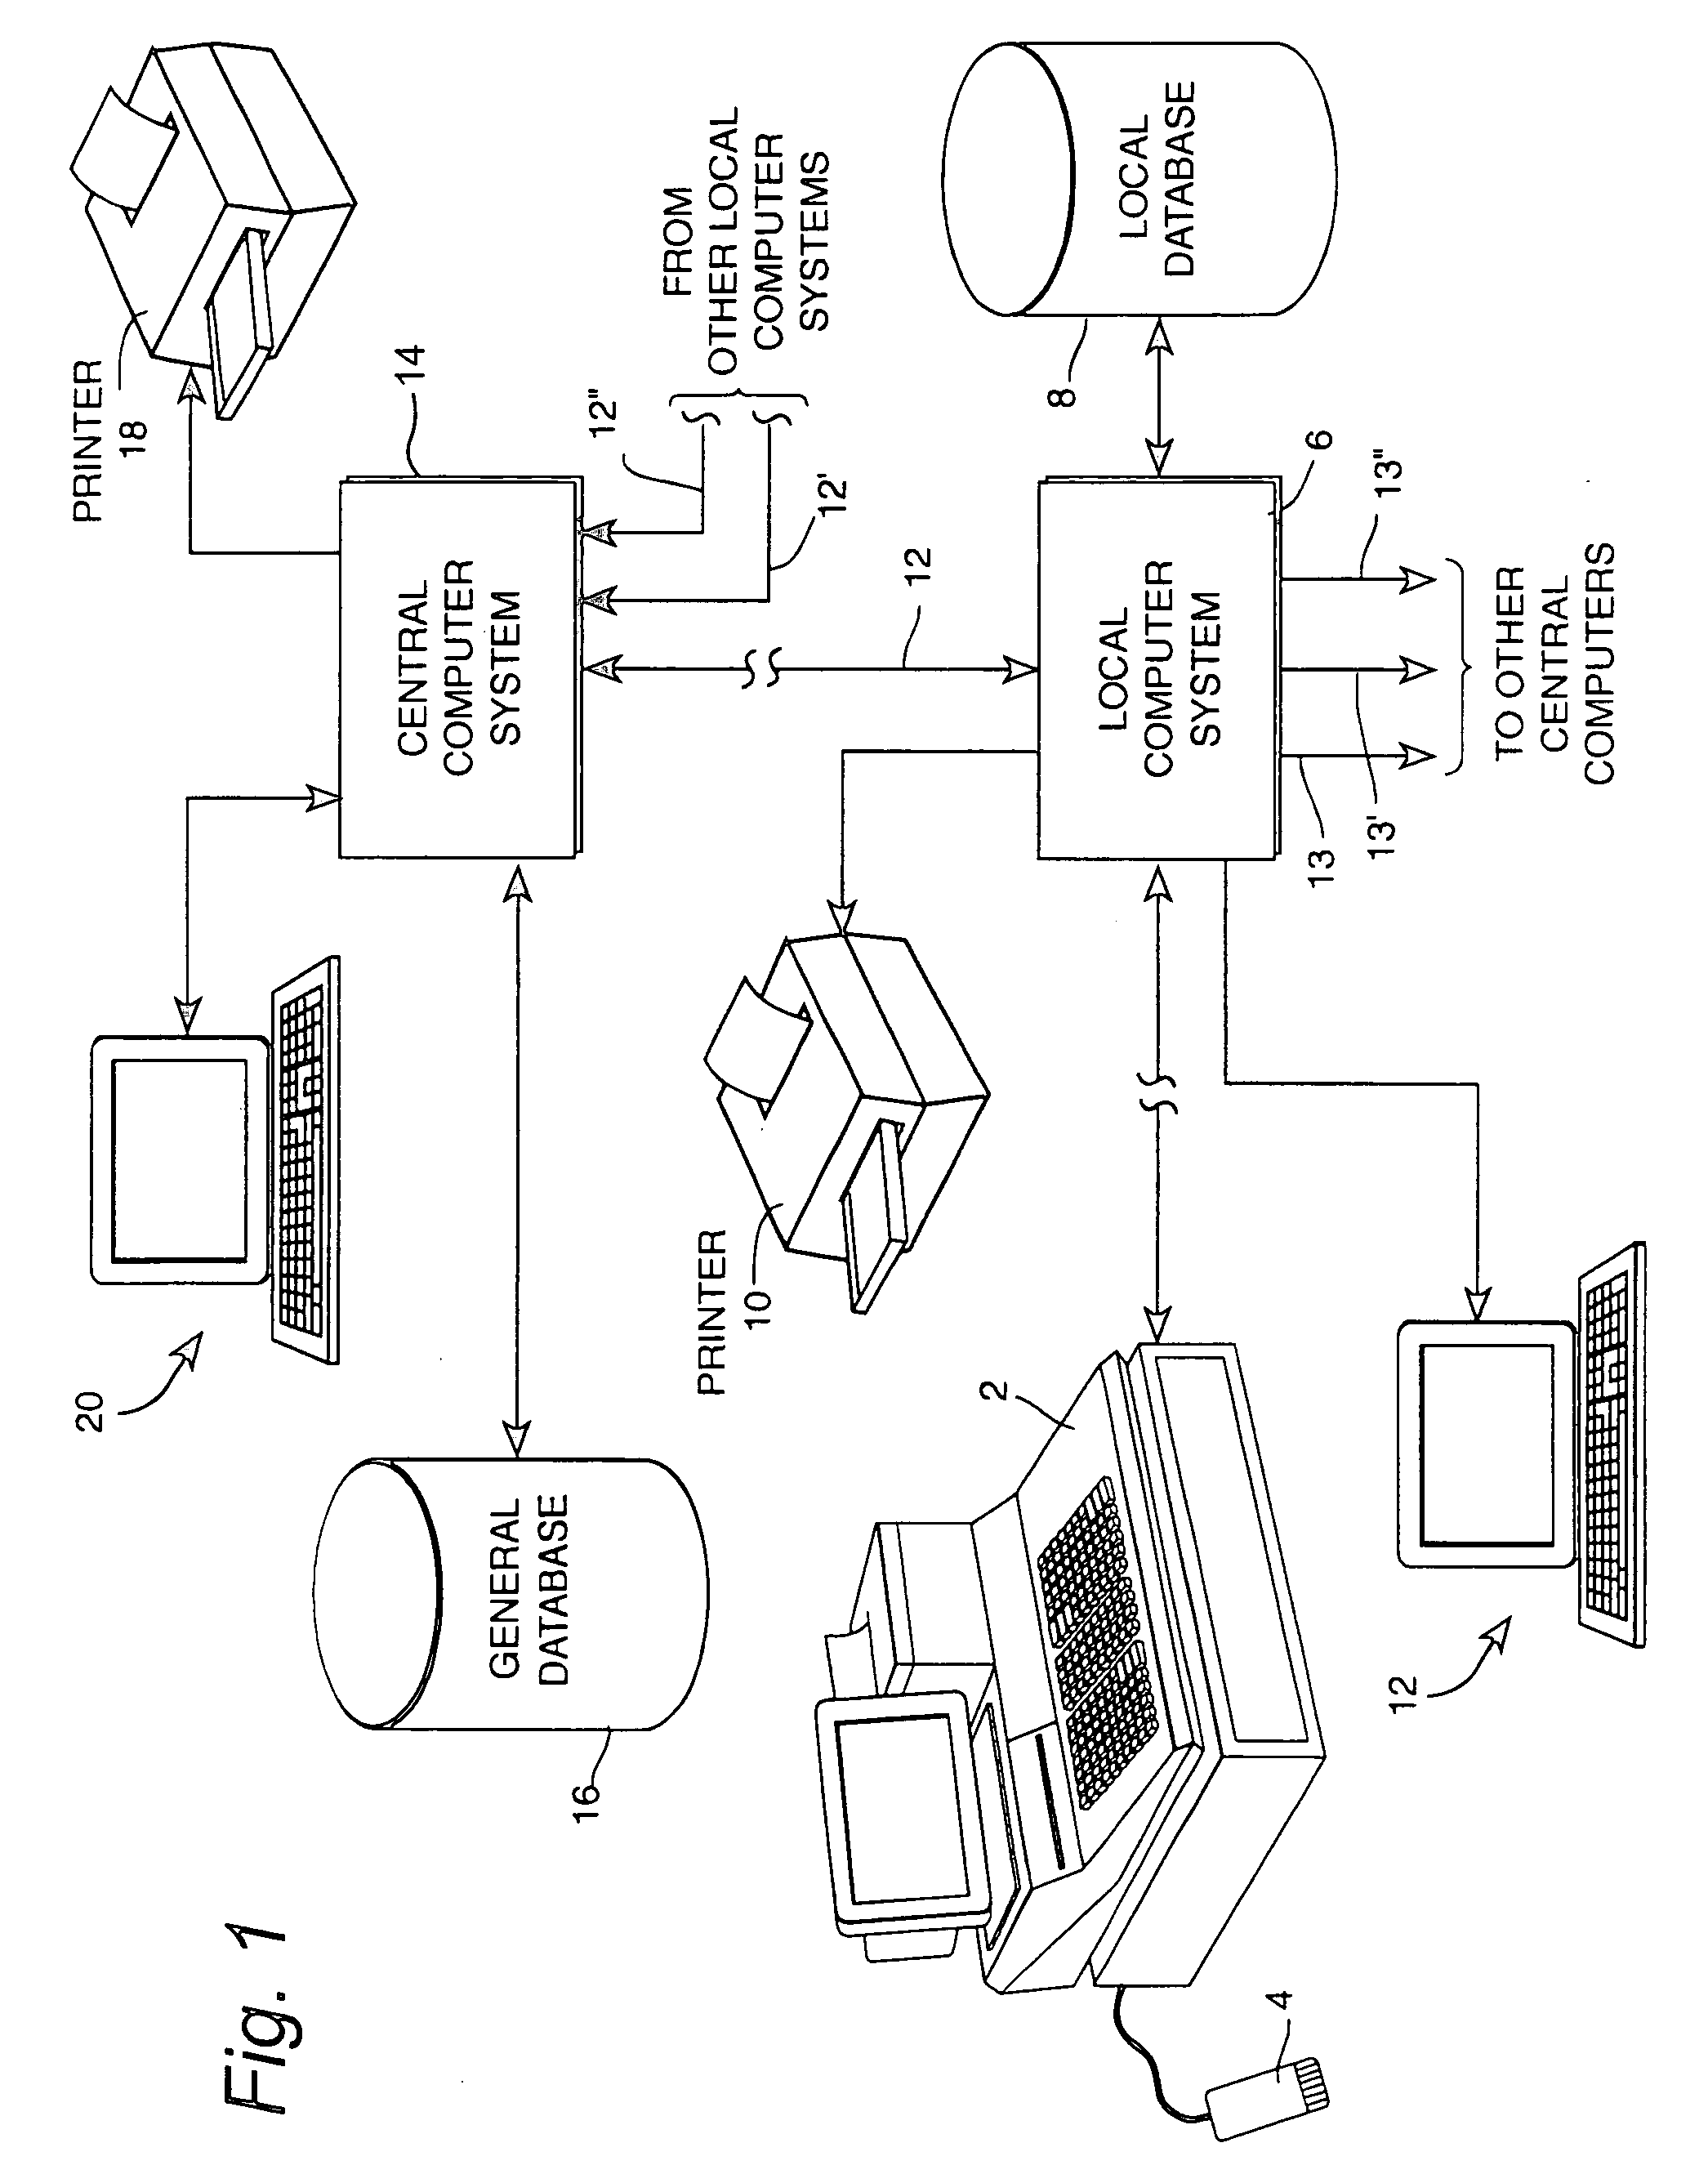 Method and apparatus for fraud reduction and product recovery